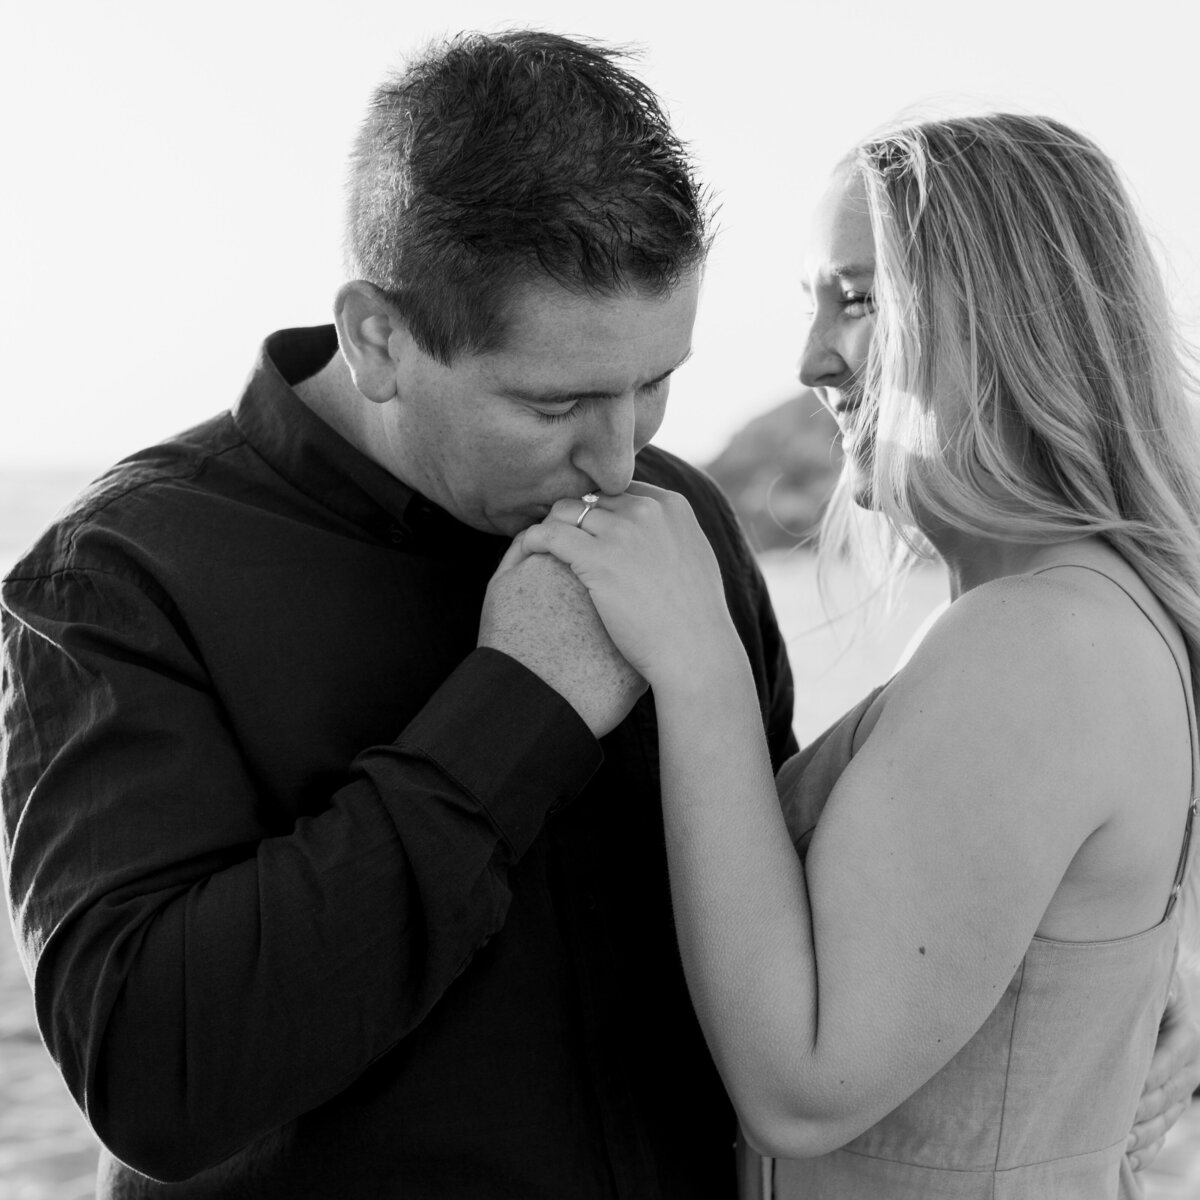 Kissing on the hand engagement picture